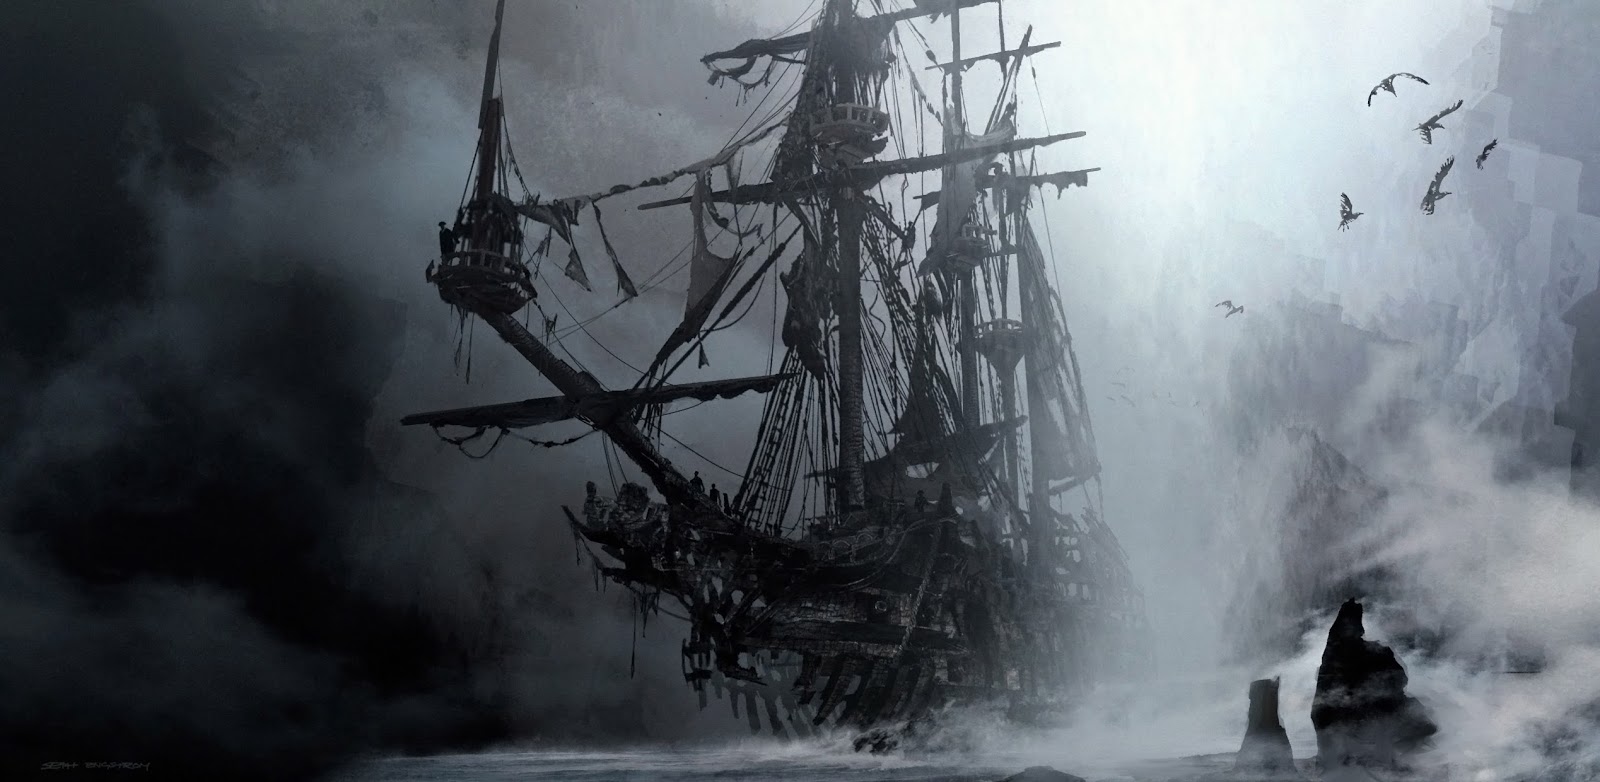 Reminds me of Salazar ship "Silent Mary" from Pirates of the Cari...